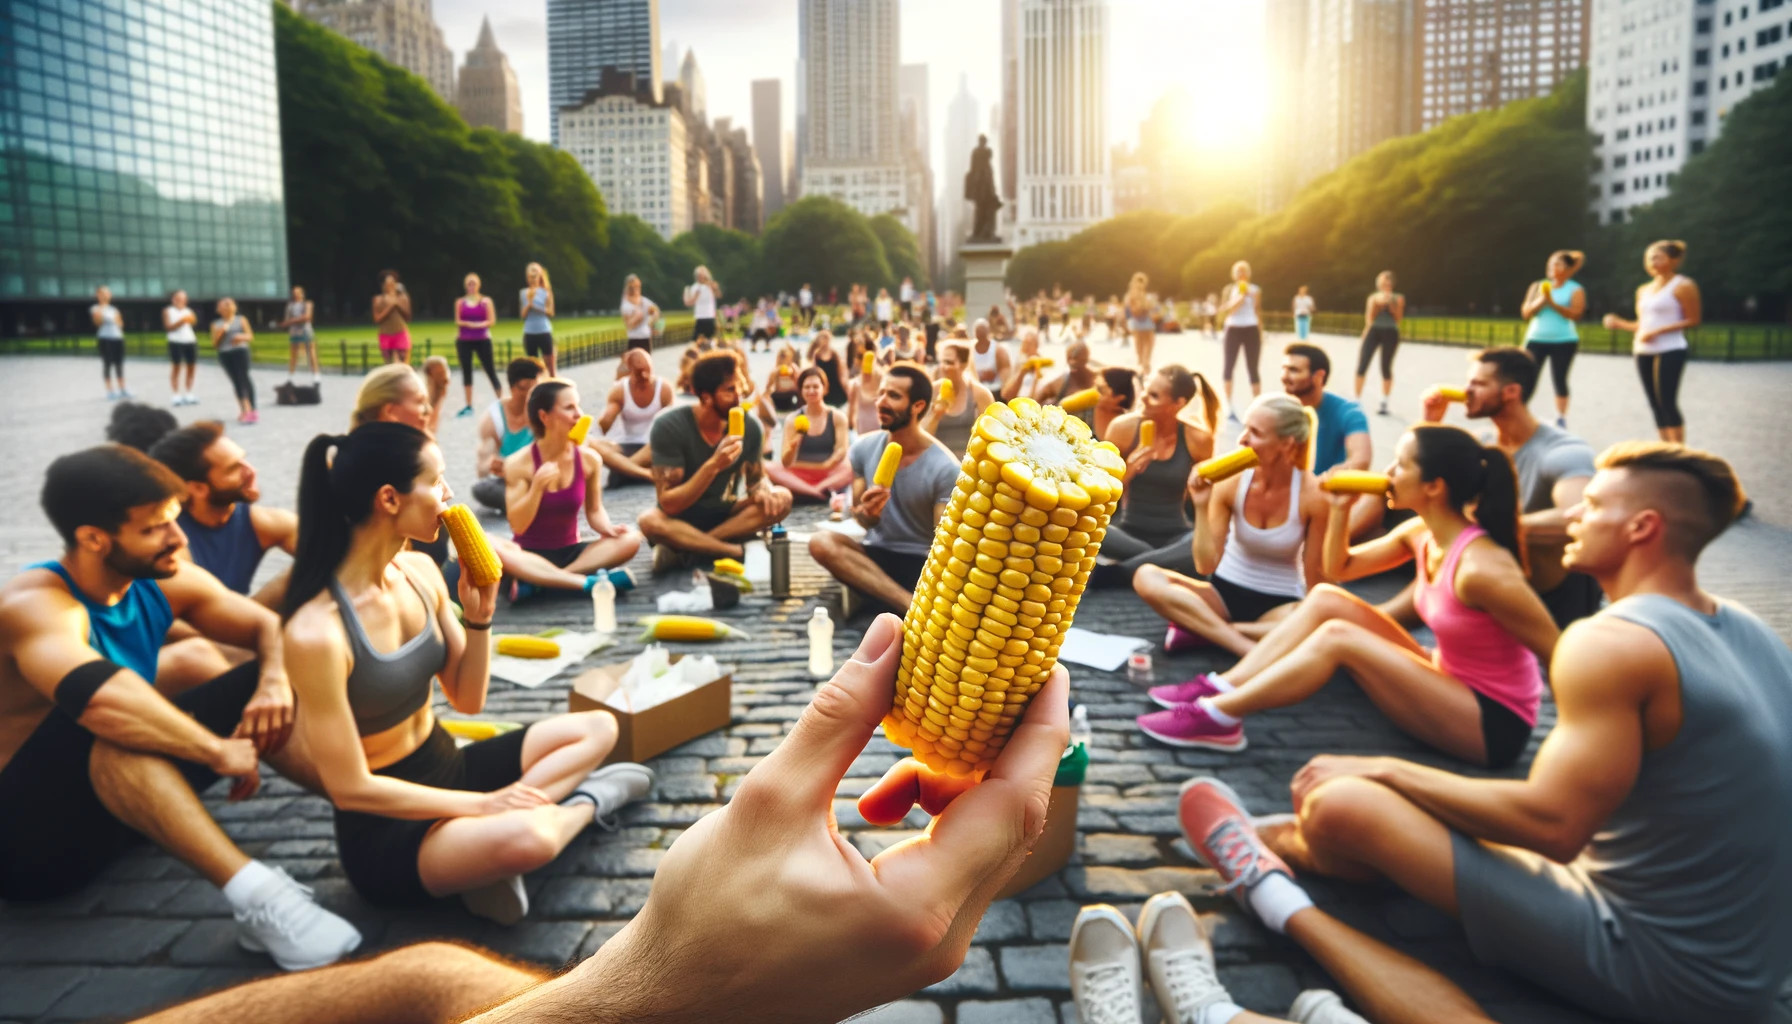 A group fitness class in an urban park enjoying a post-workout snack of corn on the cob, showing community and healthy living.